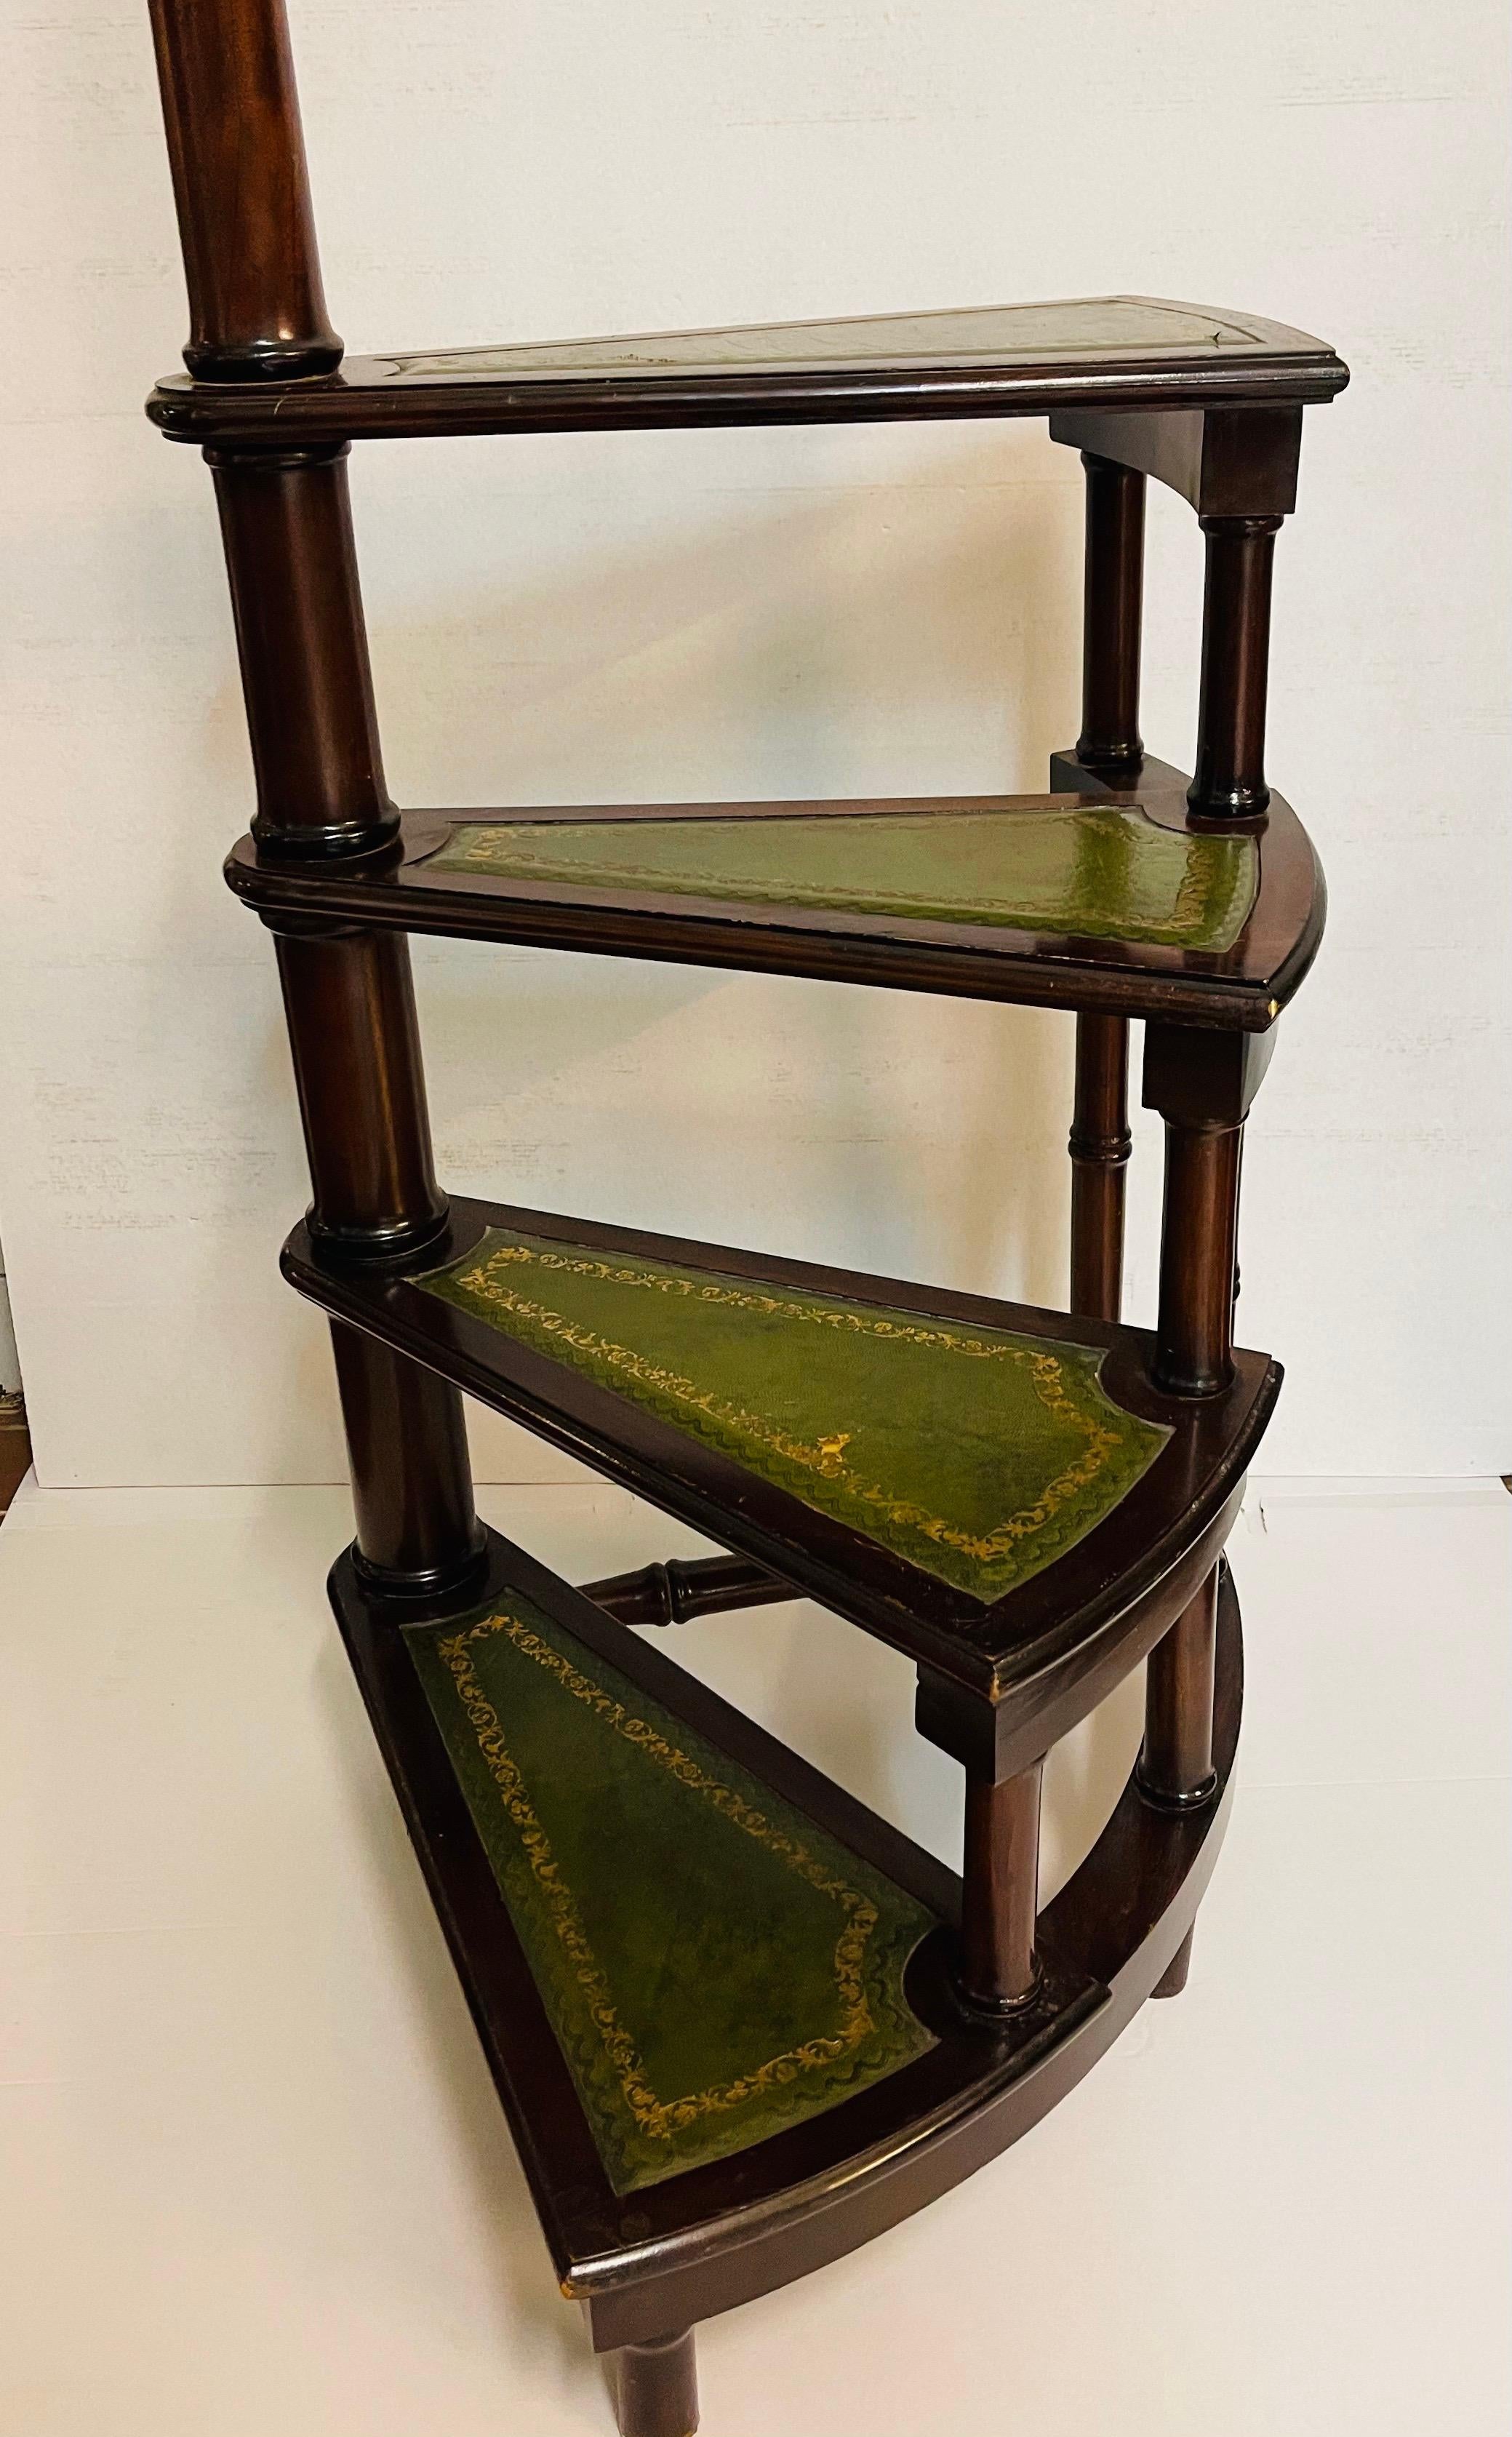 20th century English leather library step or stairs / stepladder, Victorian

Solid mahogany wood. English library manager / stepladder 20th century, Victorian. Four step with classic dark leather plate and gold embossing. Library stairs, England,